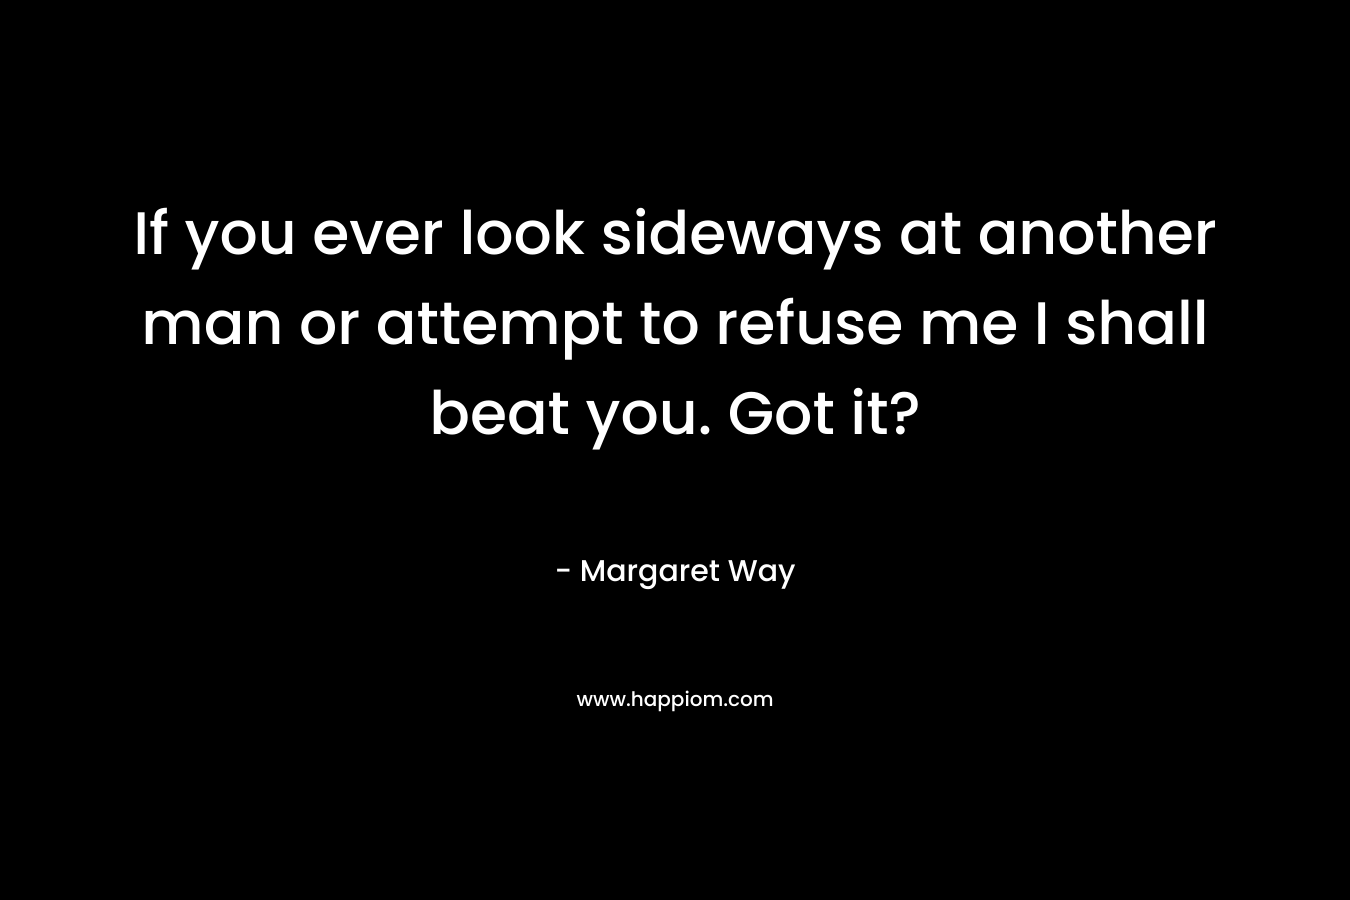 If you ever look sideways at another man or attempt to refuse me I shall beat you. Got it? – Margaret Way